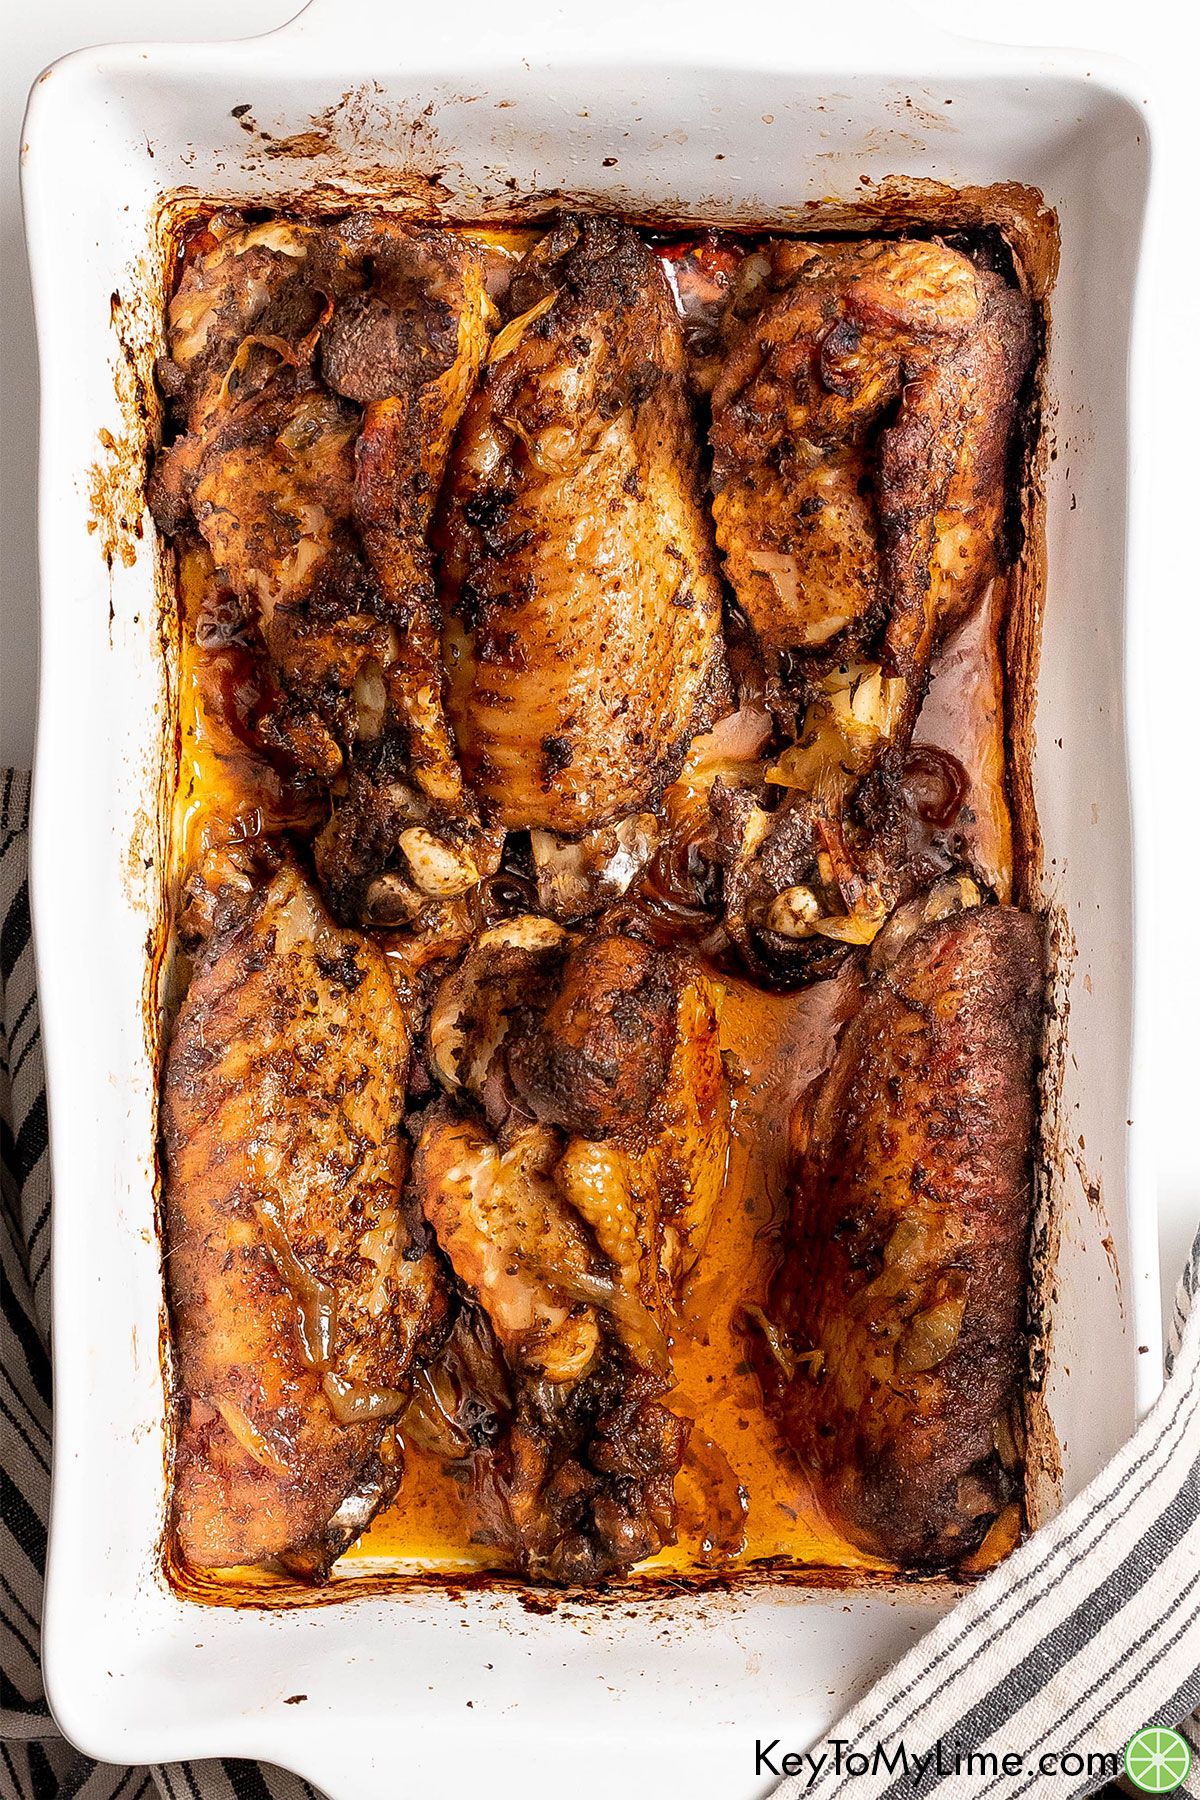 A single layer of crispy turkey wings in a large casserole dish with a striped napkin to the side.